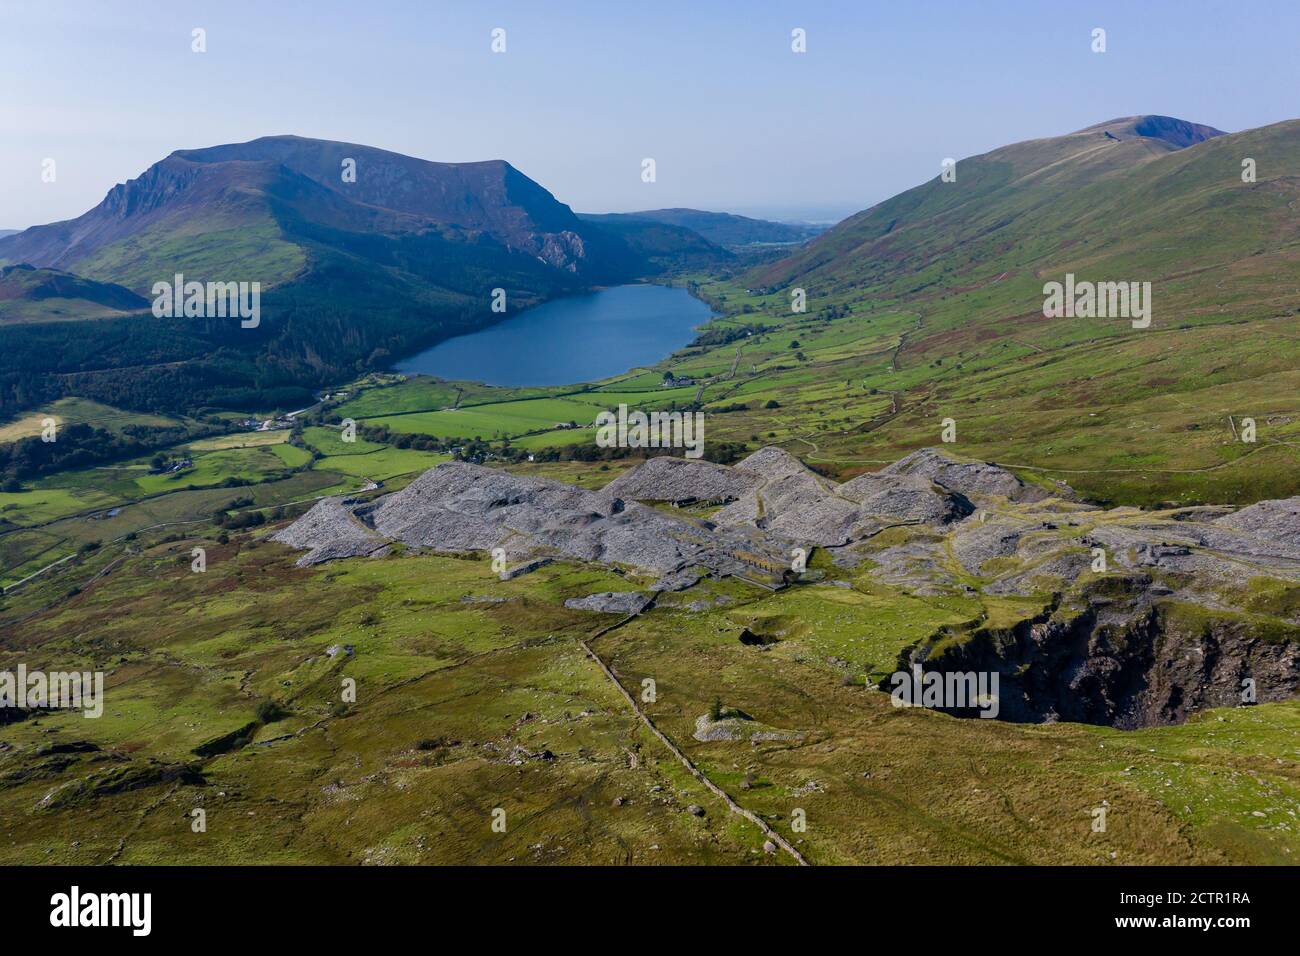 Aerial view of a lake in beautiful mountainous scenery (Rhyd Ddu, Snowdonia, Wales) Stock Photo